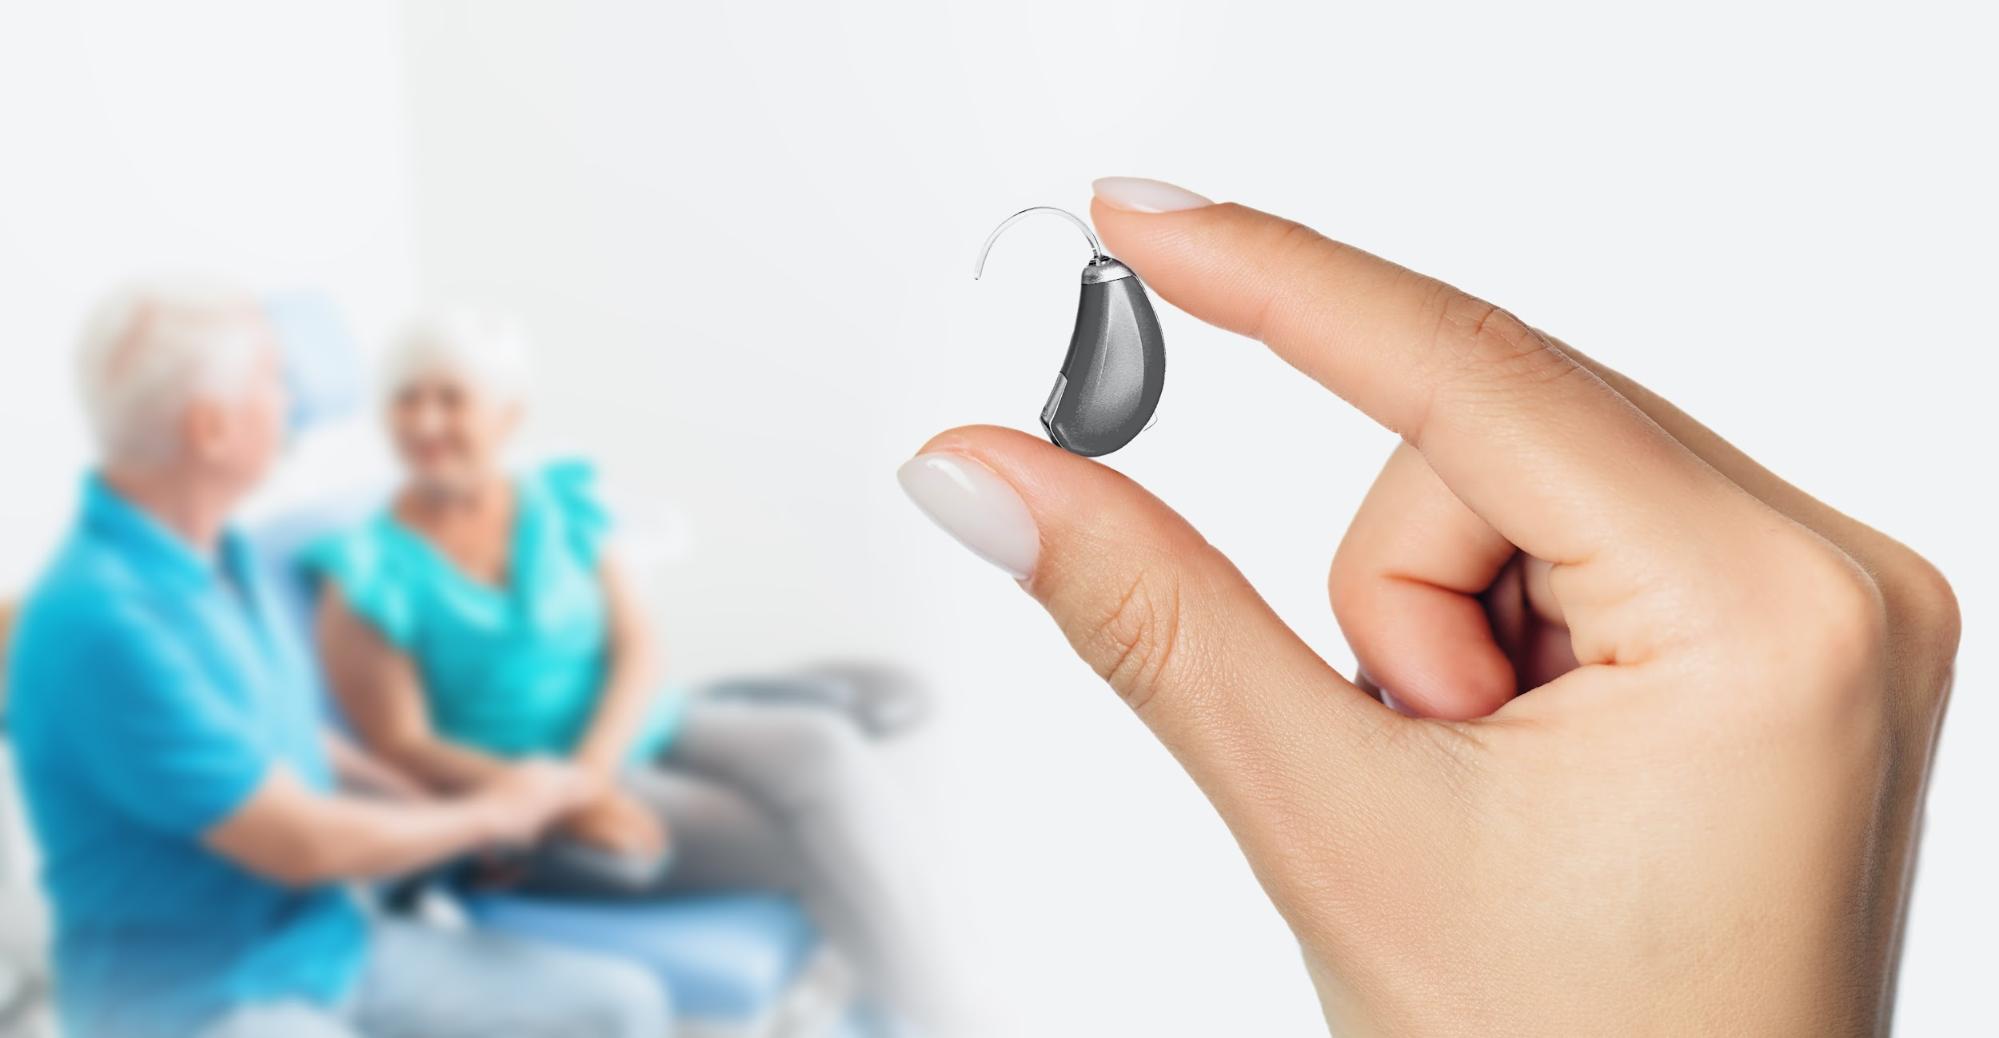 hearing aid features